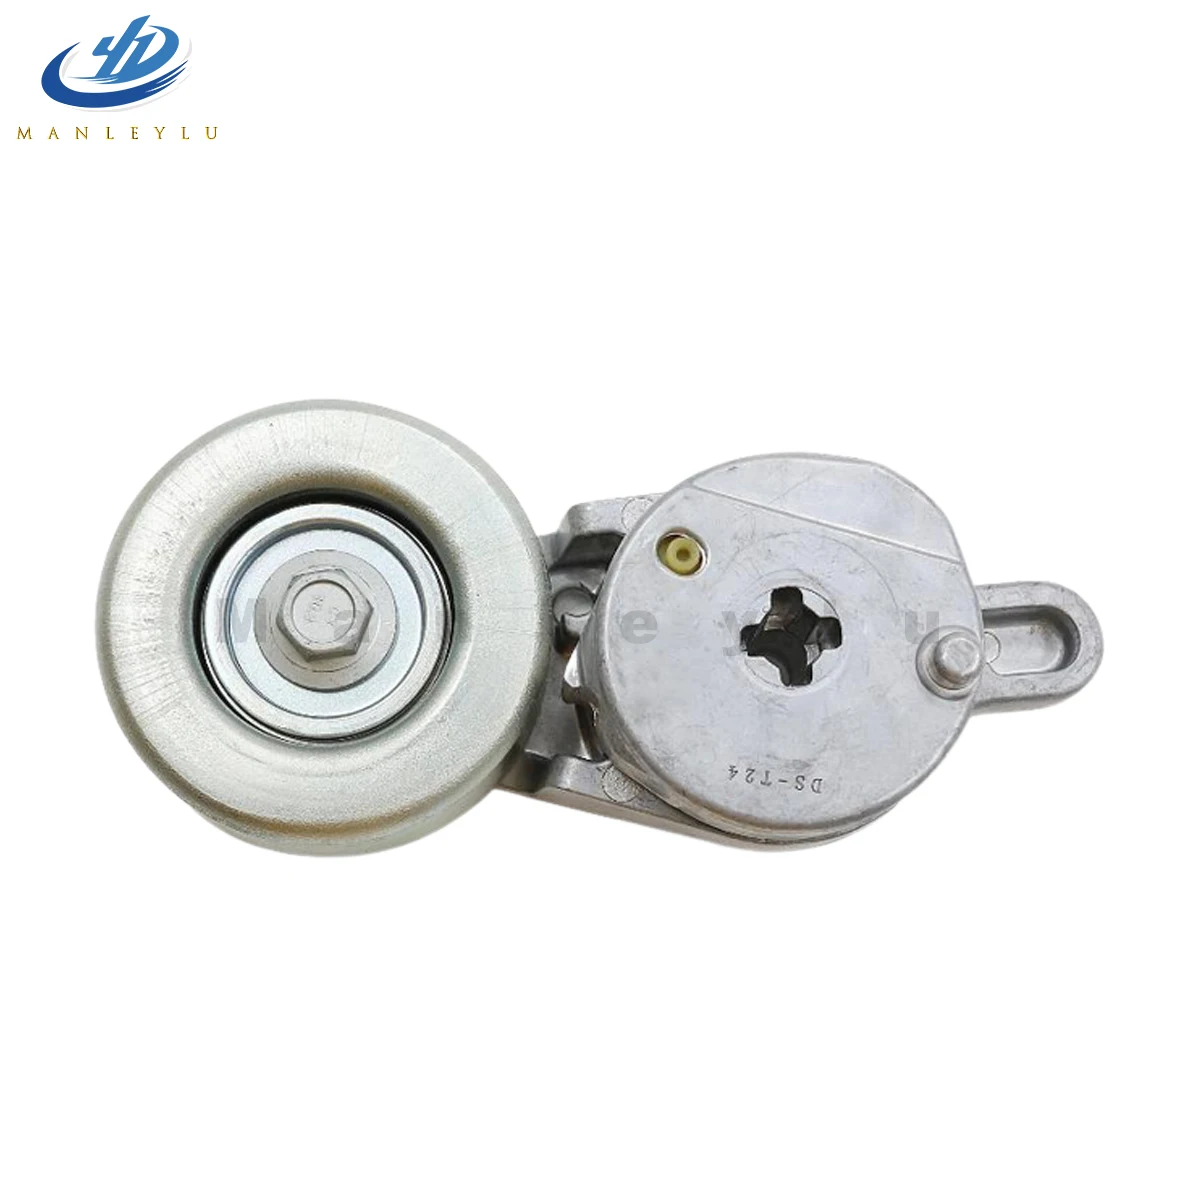 

Belt Tensioners Pulley For Toyota Camry 2.5L Sienna Venza Lexus Rx270 2.7L ES250 16620-36010 16620-0V020